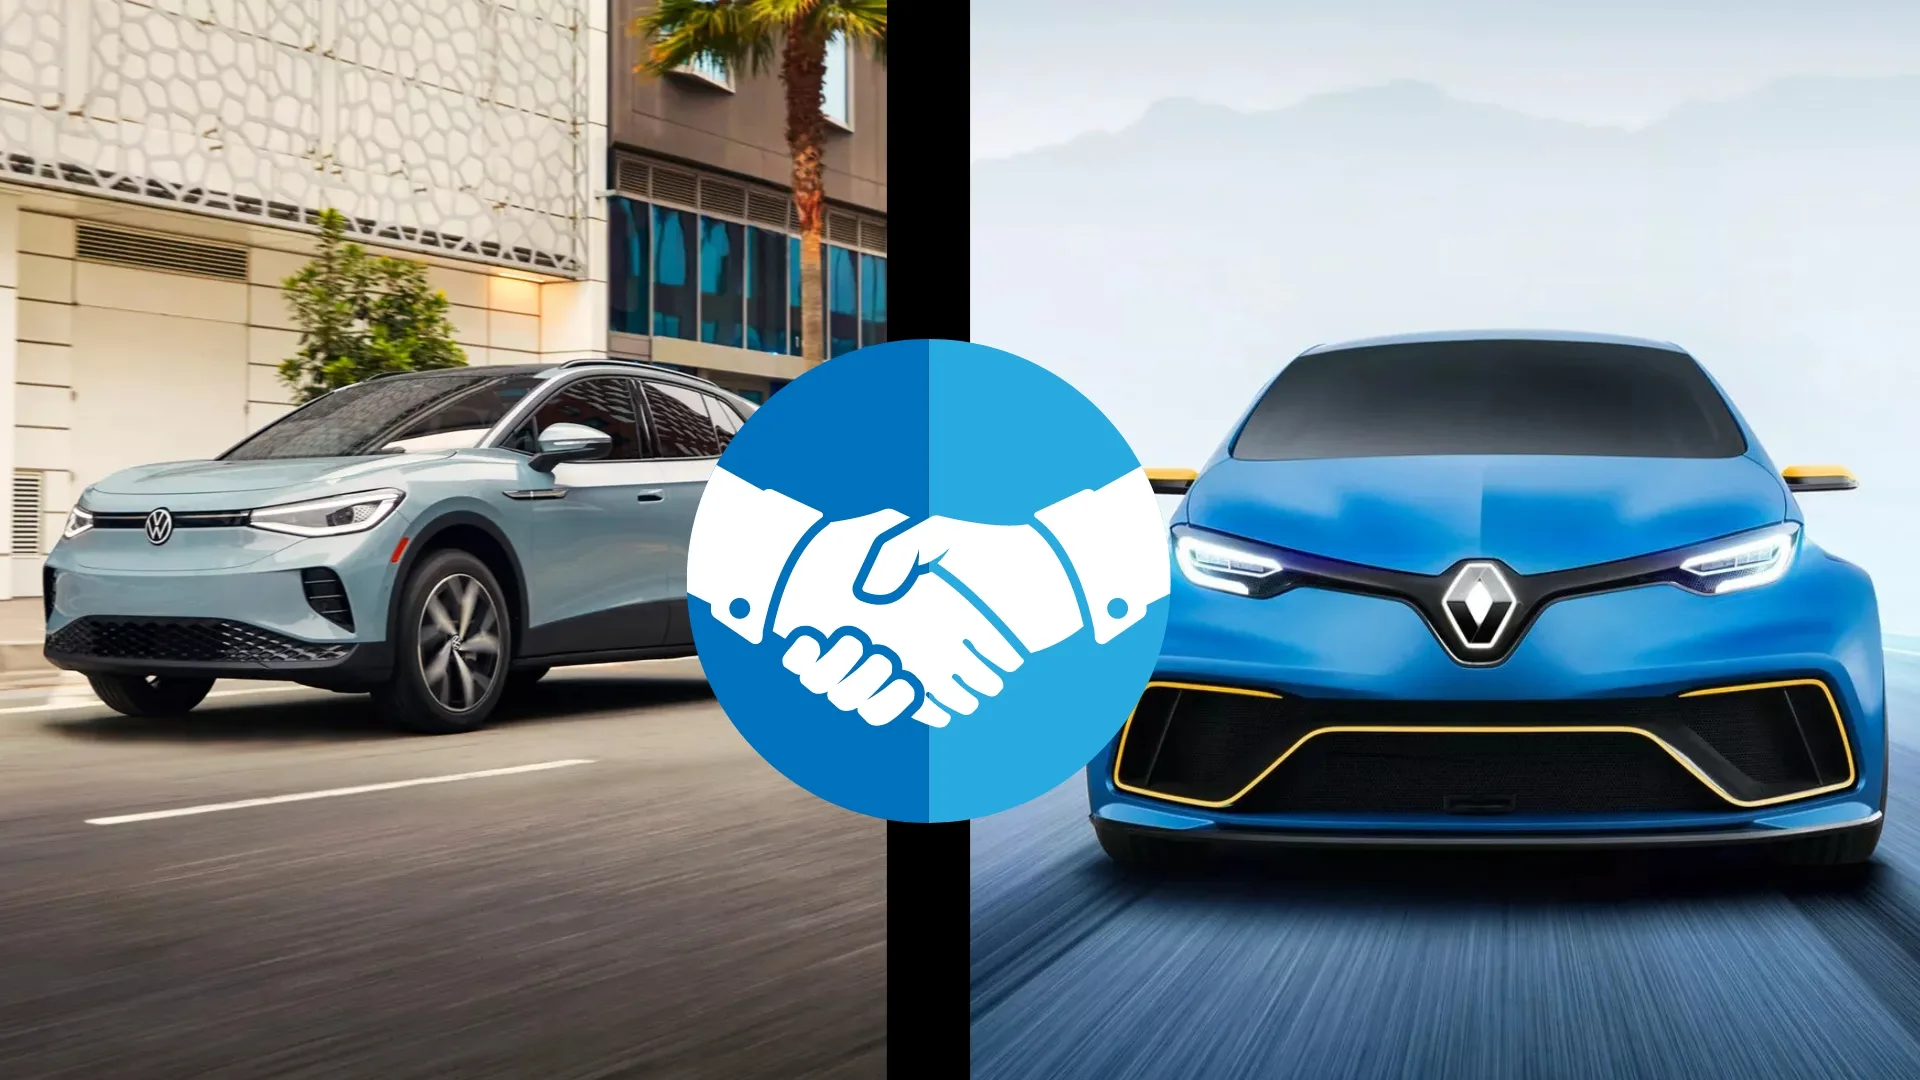 Volkswagen and Renault explore teaming up to create budget-friendly electric cars for mass production